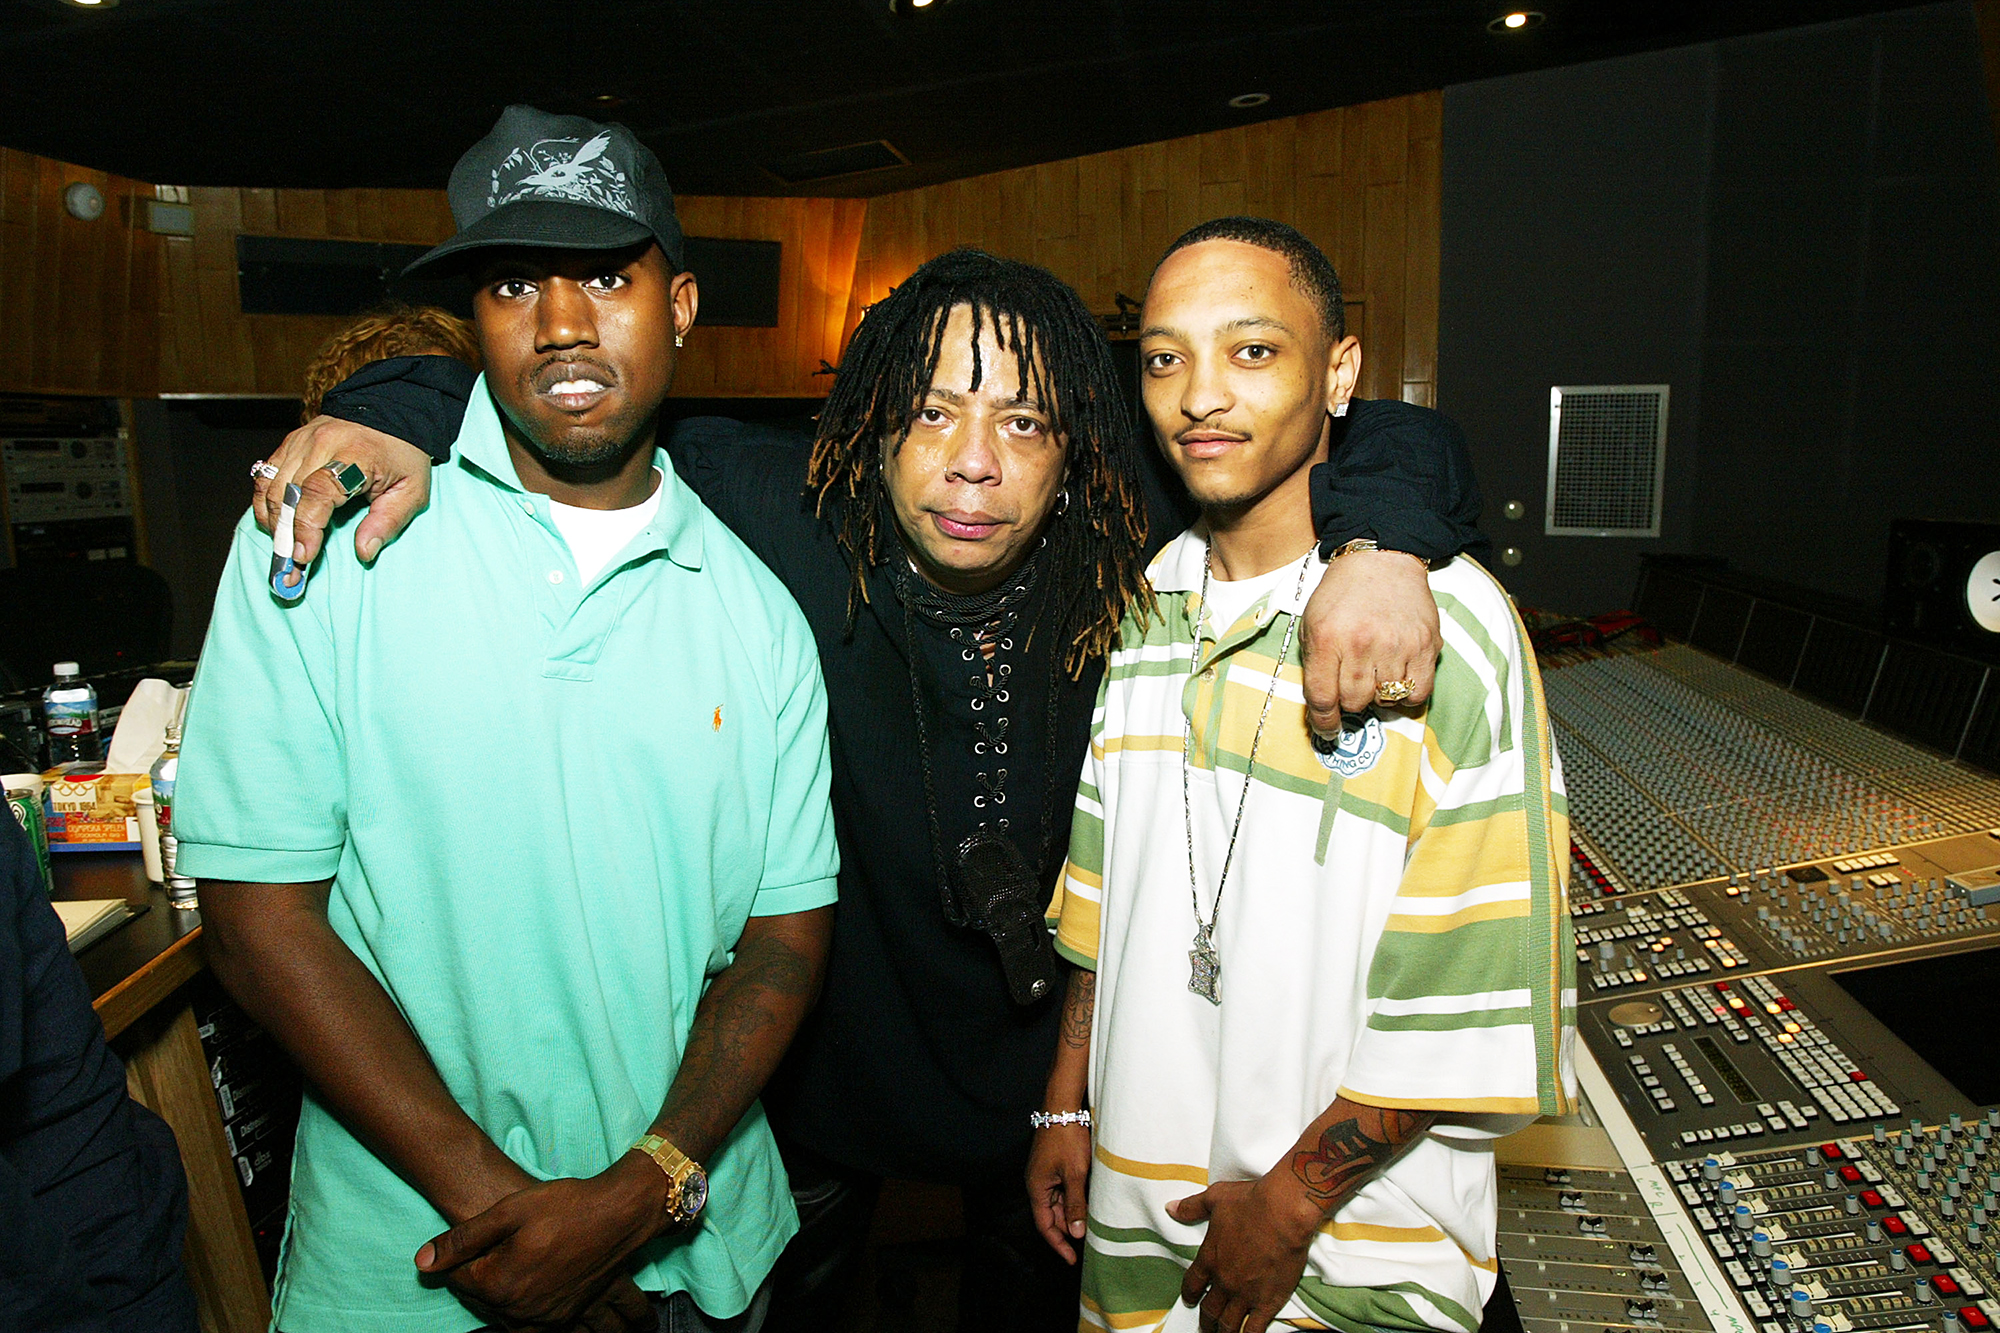 From left: Kanye West, Rick James and Bump J in Los Angeles, on July 8, 2004.